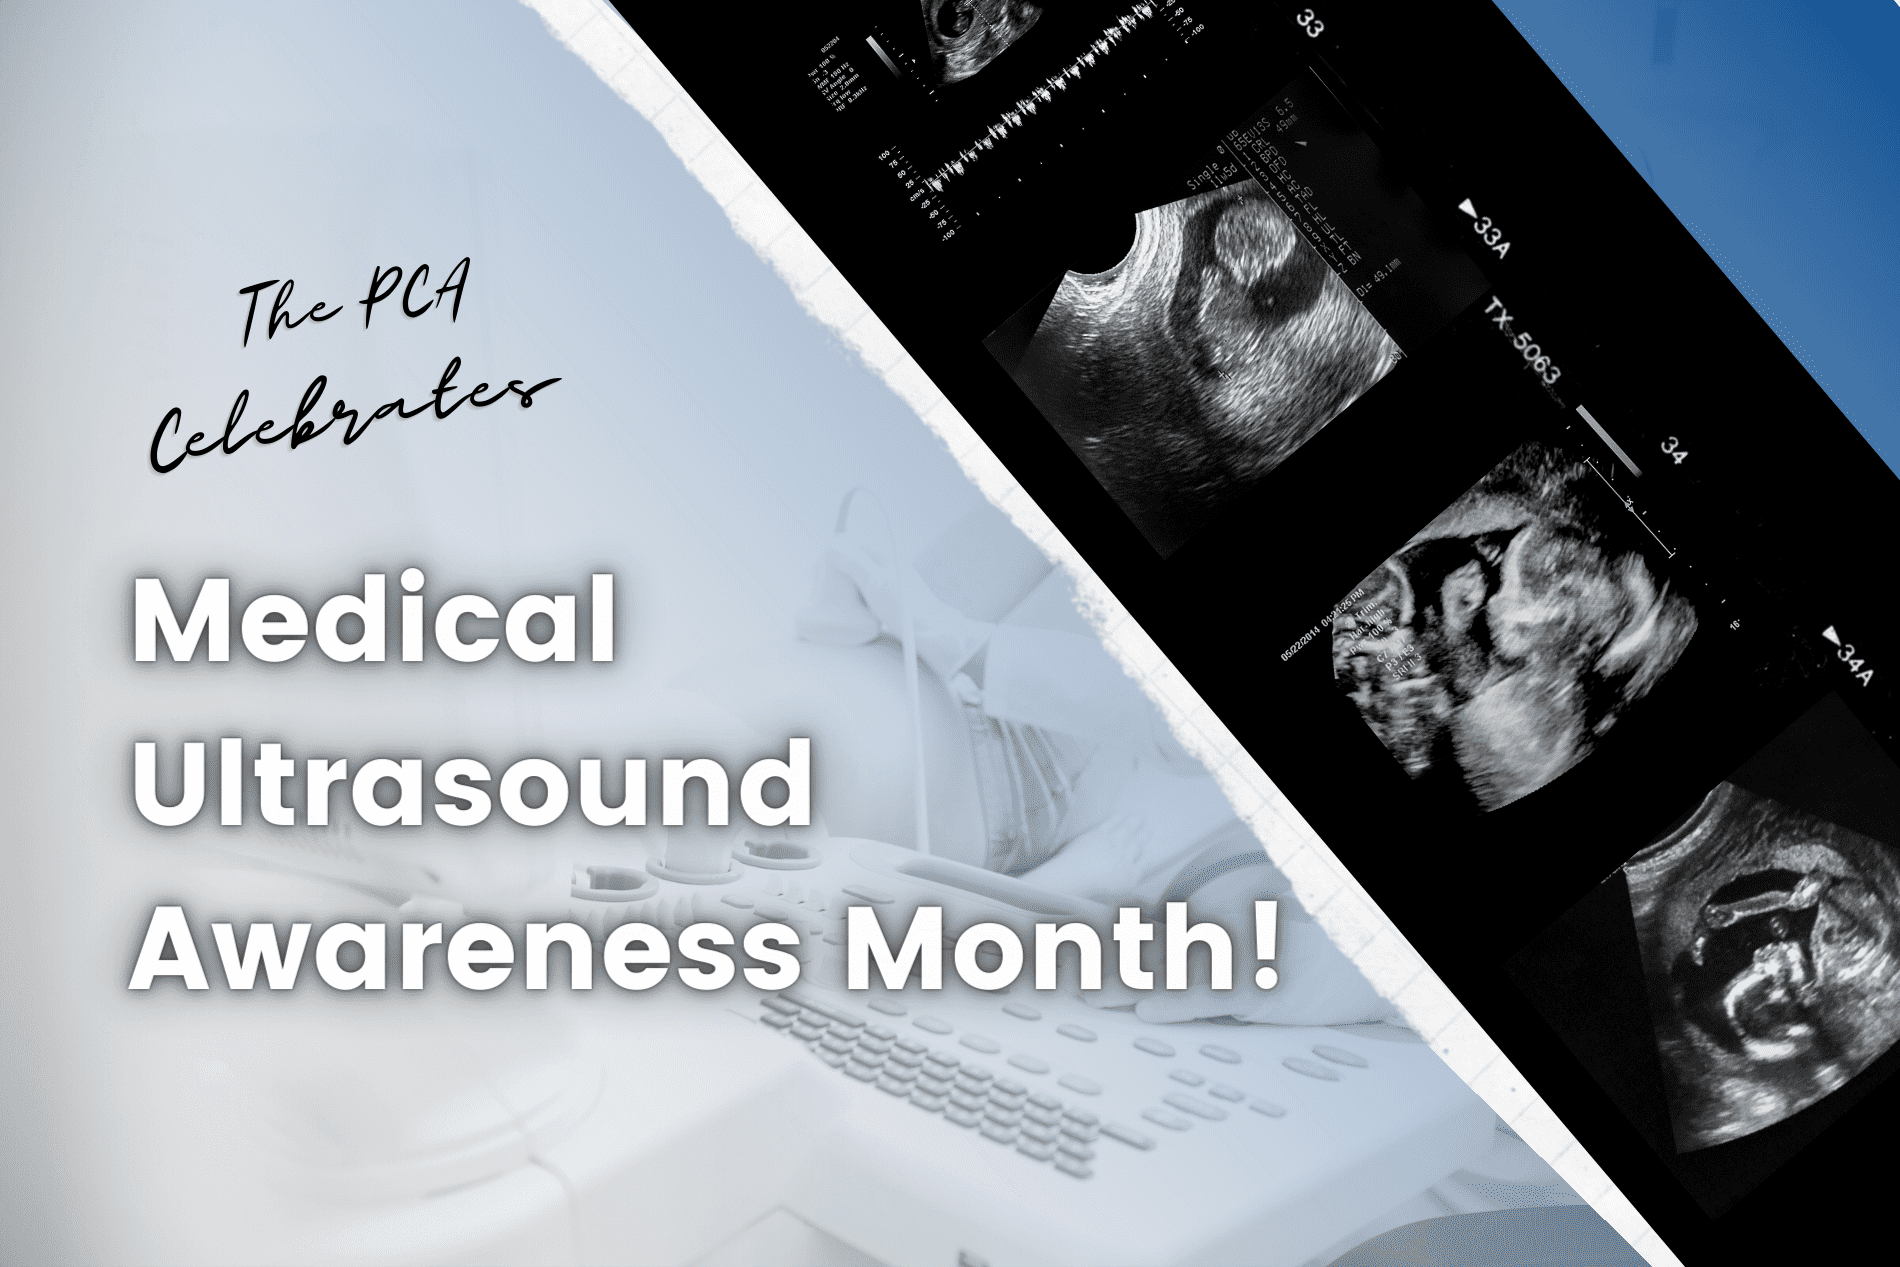 Happy Medical Ultrasound Awareness Month!